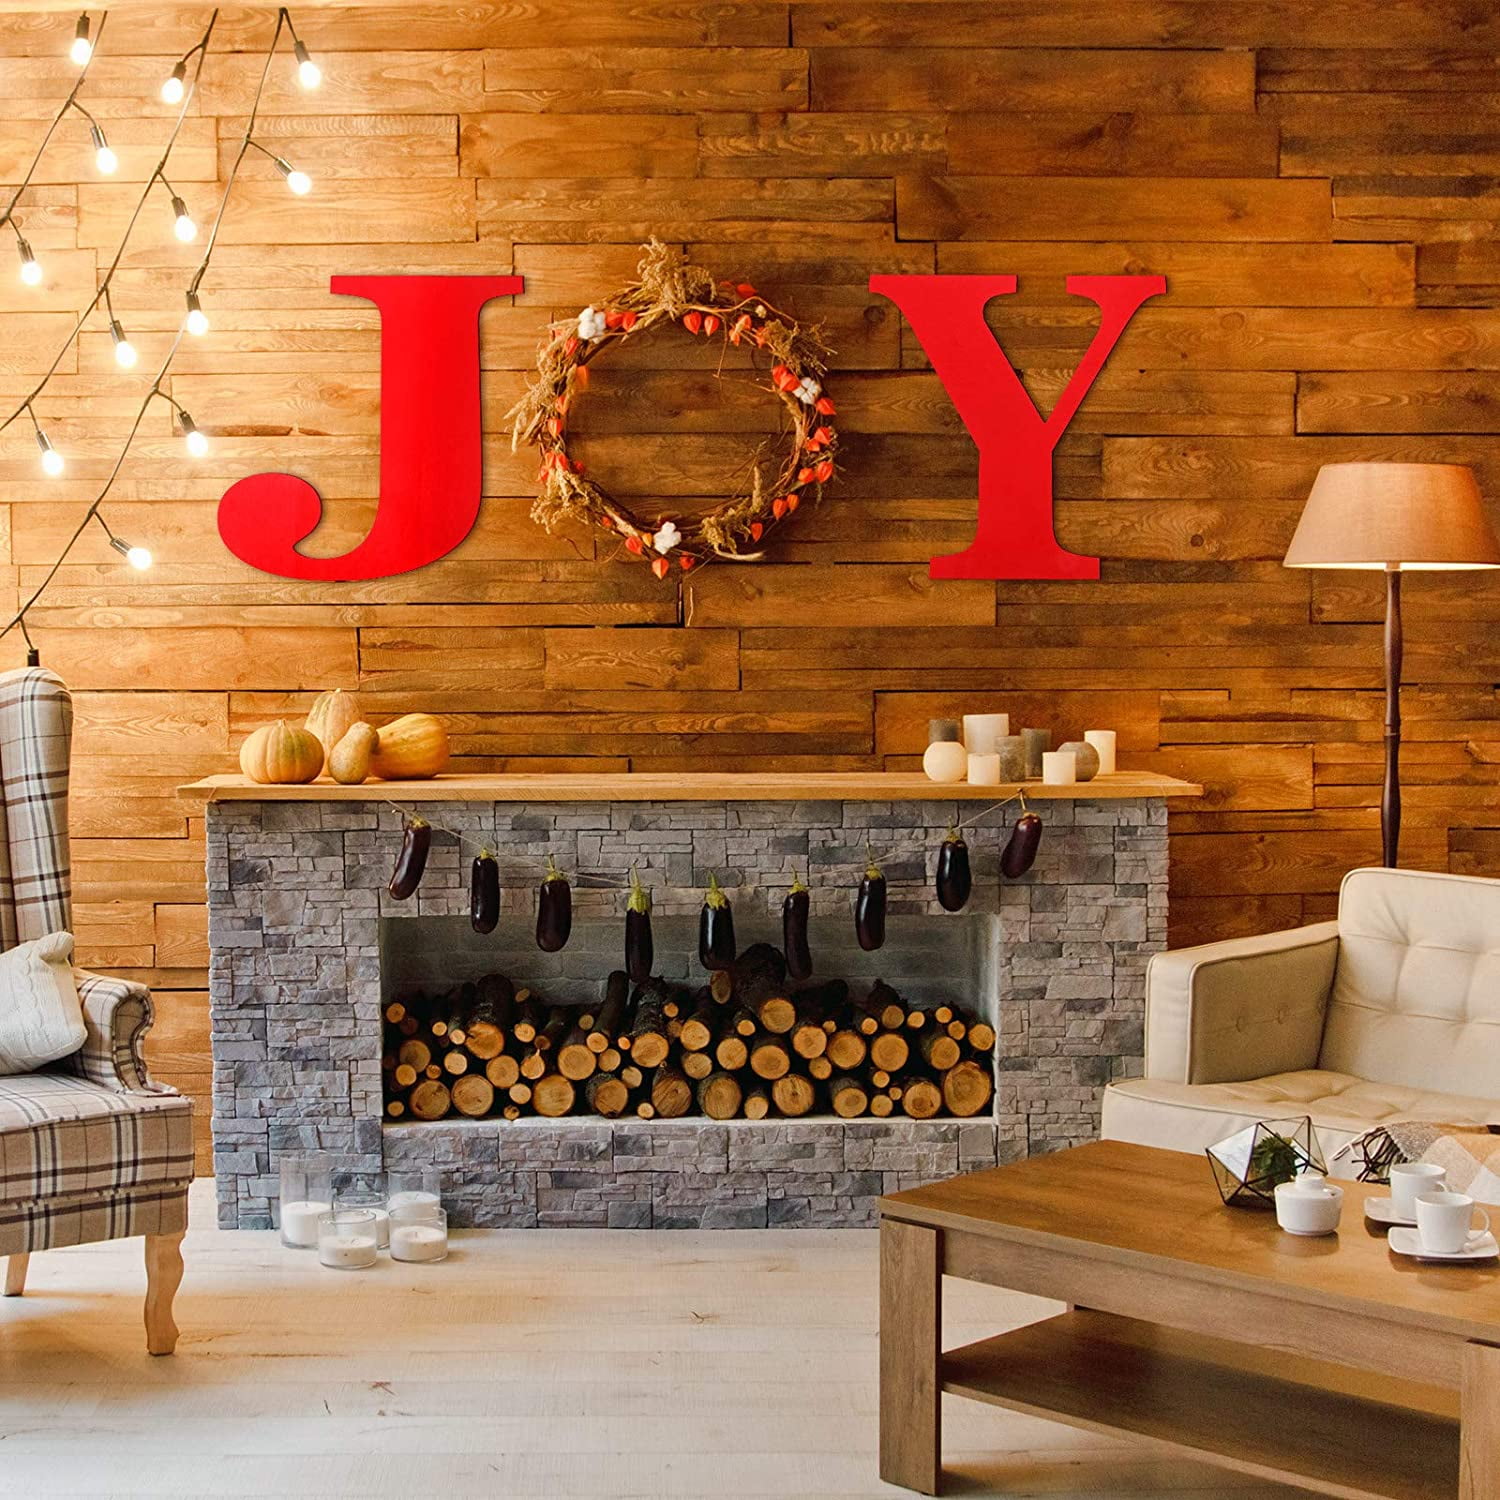 3 Pieces 12 Inch Wooden Large Joy Letter Home Sign Christmas Wooden Letter for Home Wall Decoration Red